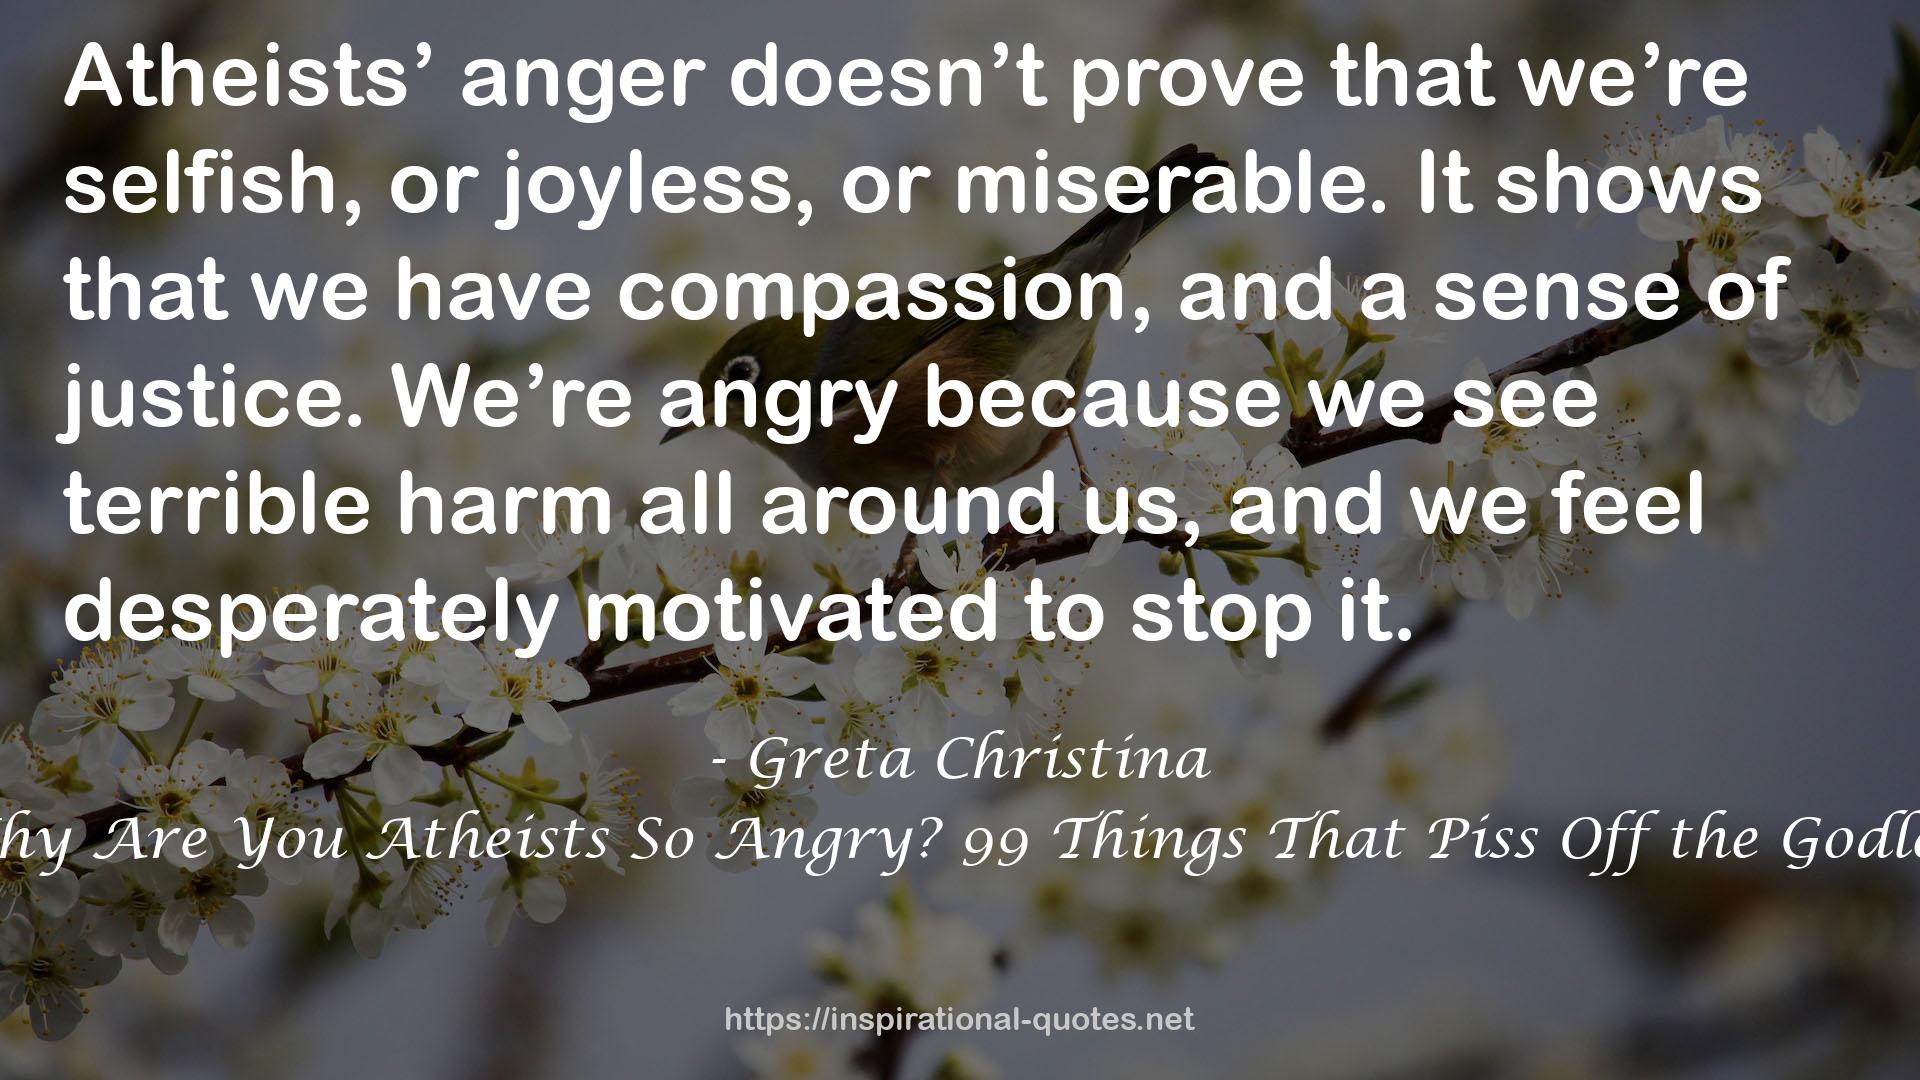 Why Are You Atheists So Angry? 99 Things That Piss Off the Godless QUOTES